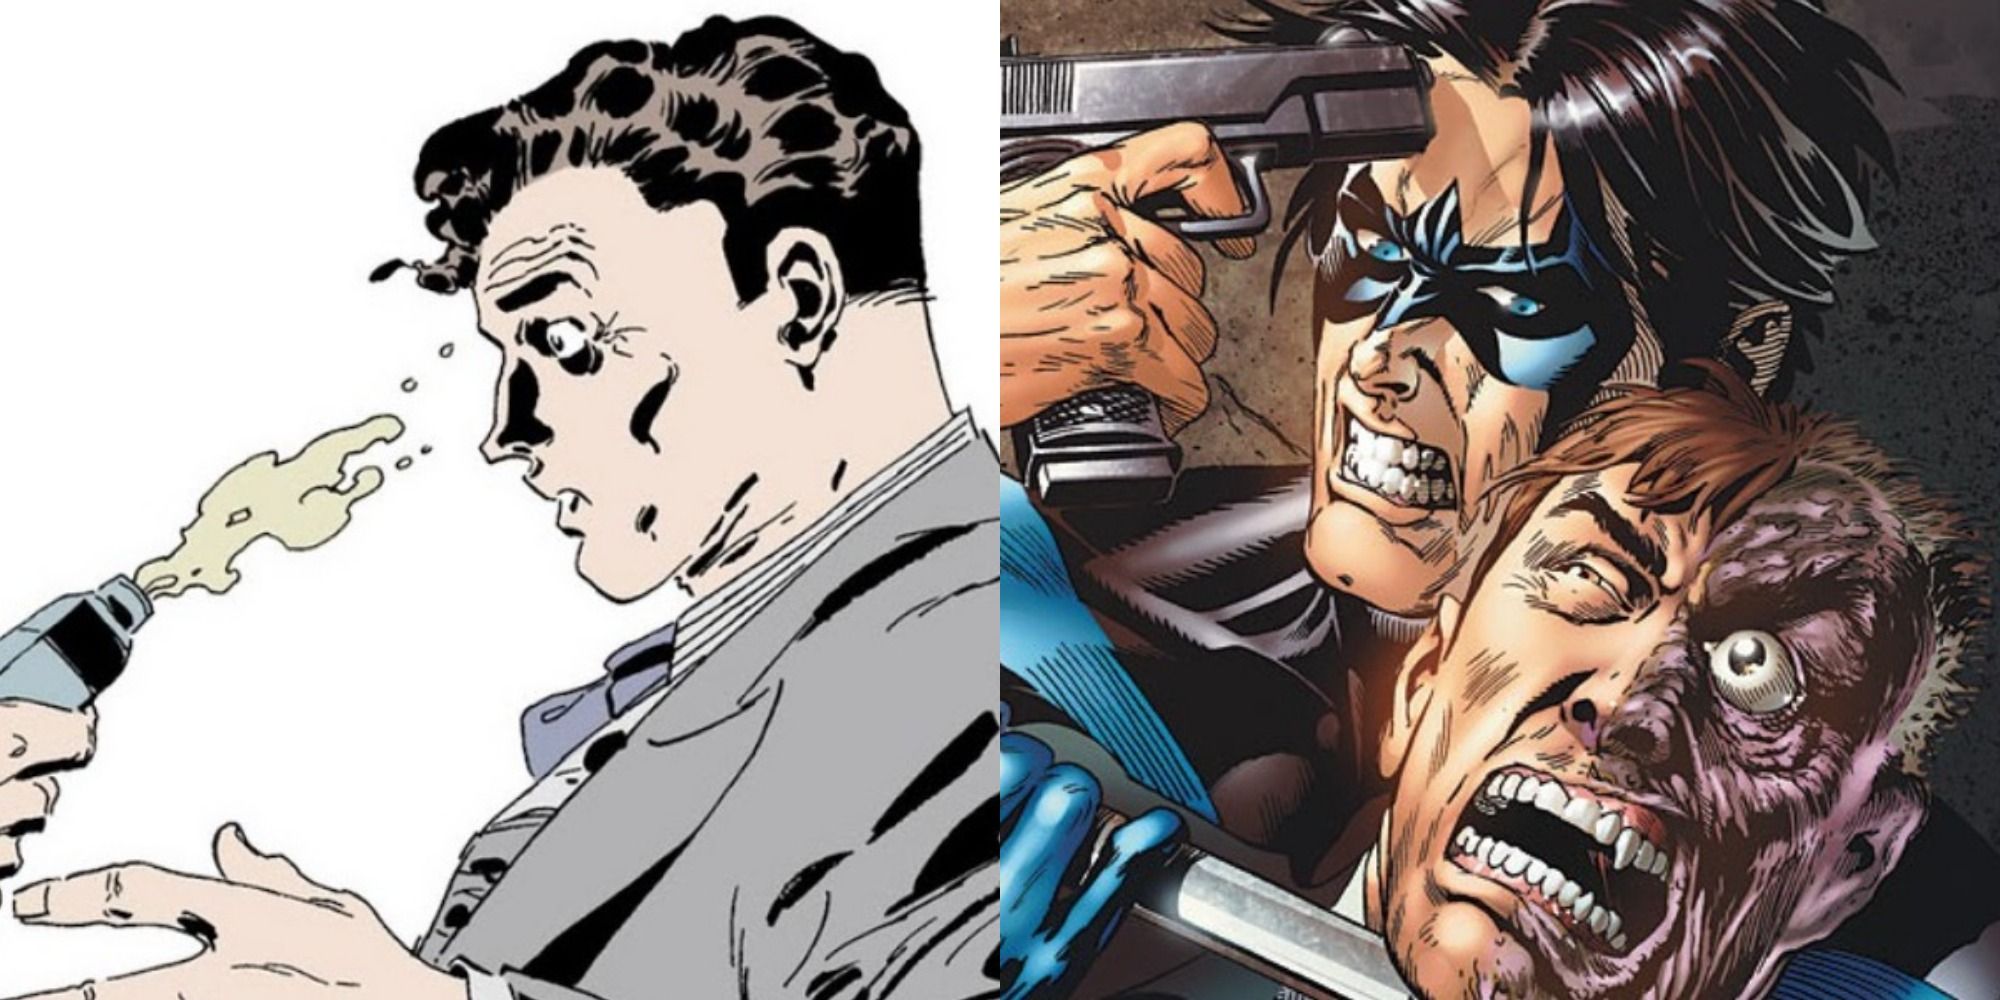 Harvey Dent gets acid thrown at his face/He holds a gun to Nightwing's head